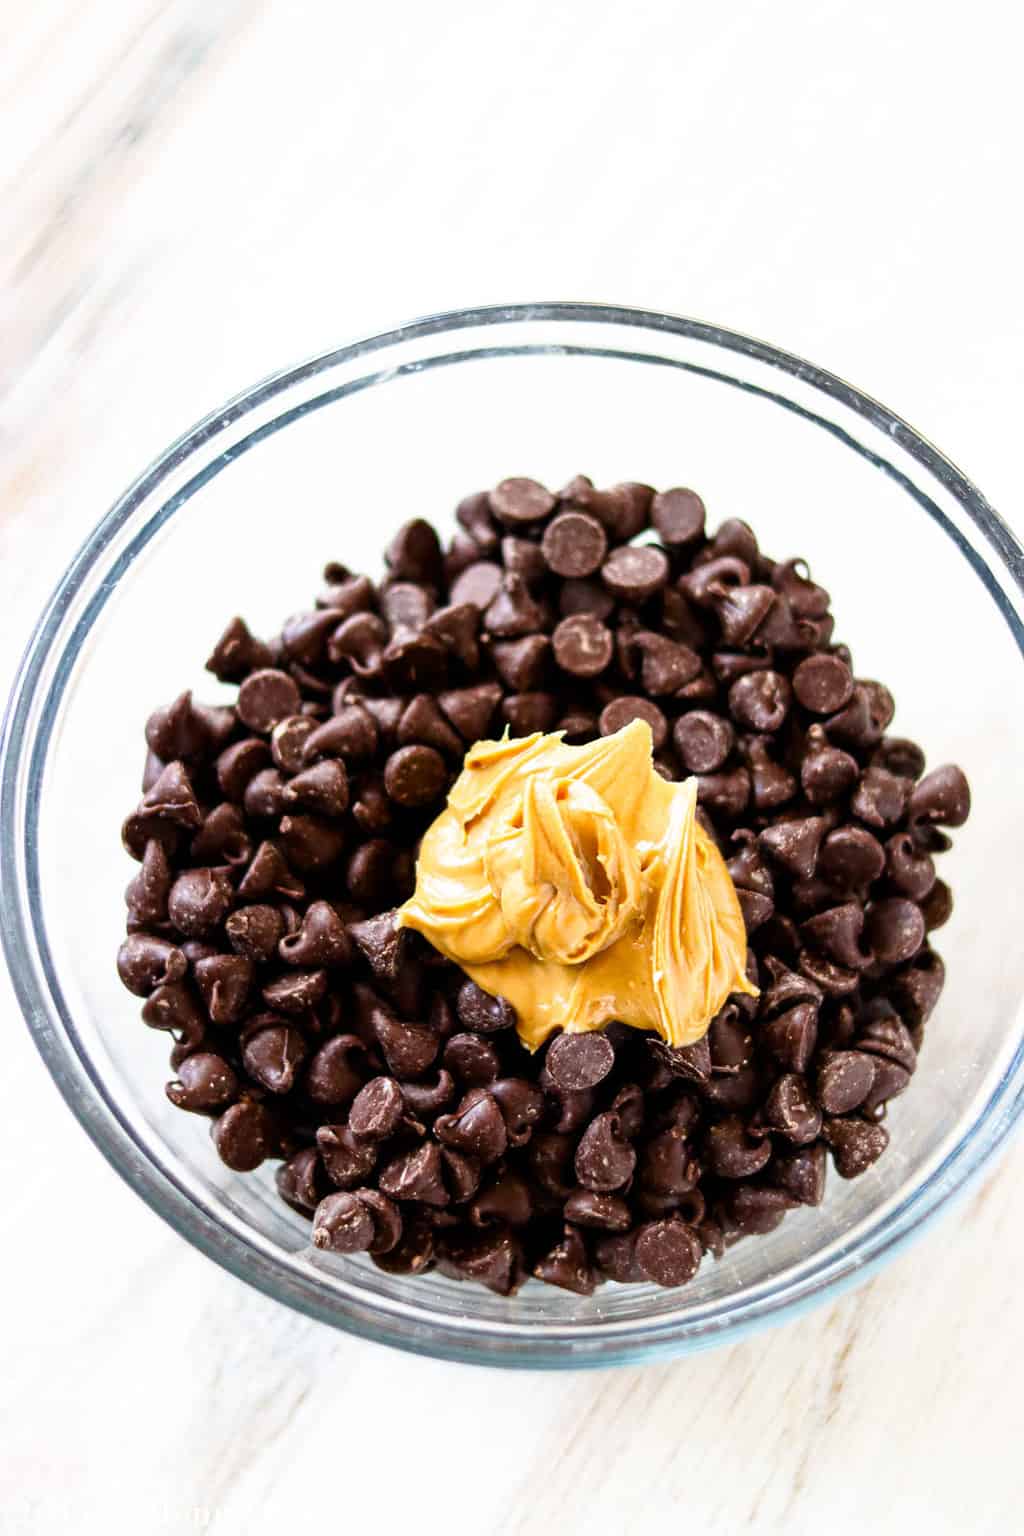 Chocolate chips and peanut butter in a small mixing bowl